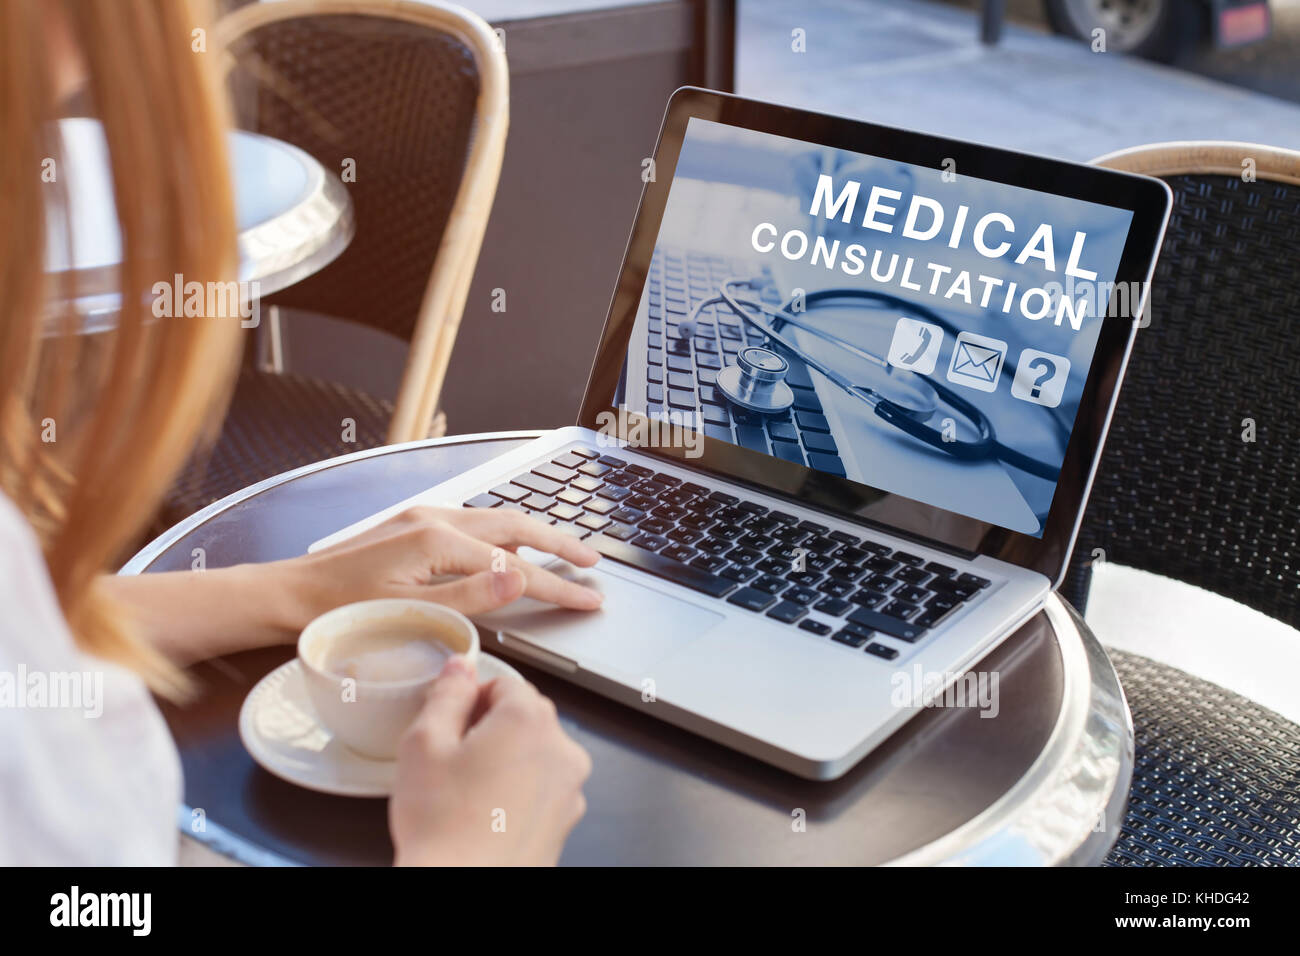 medical consultation online, doctor advice on internet Stock Photo